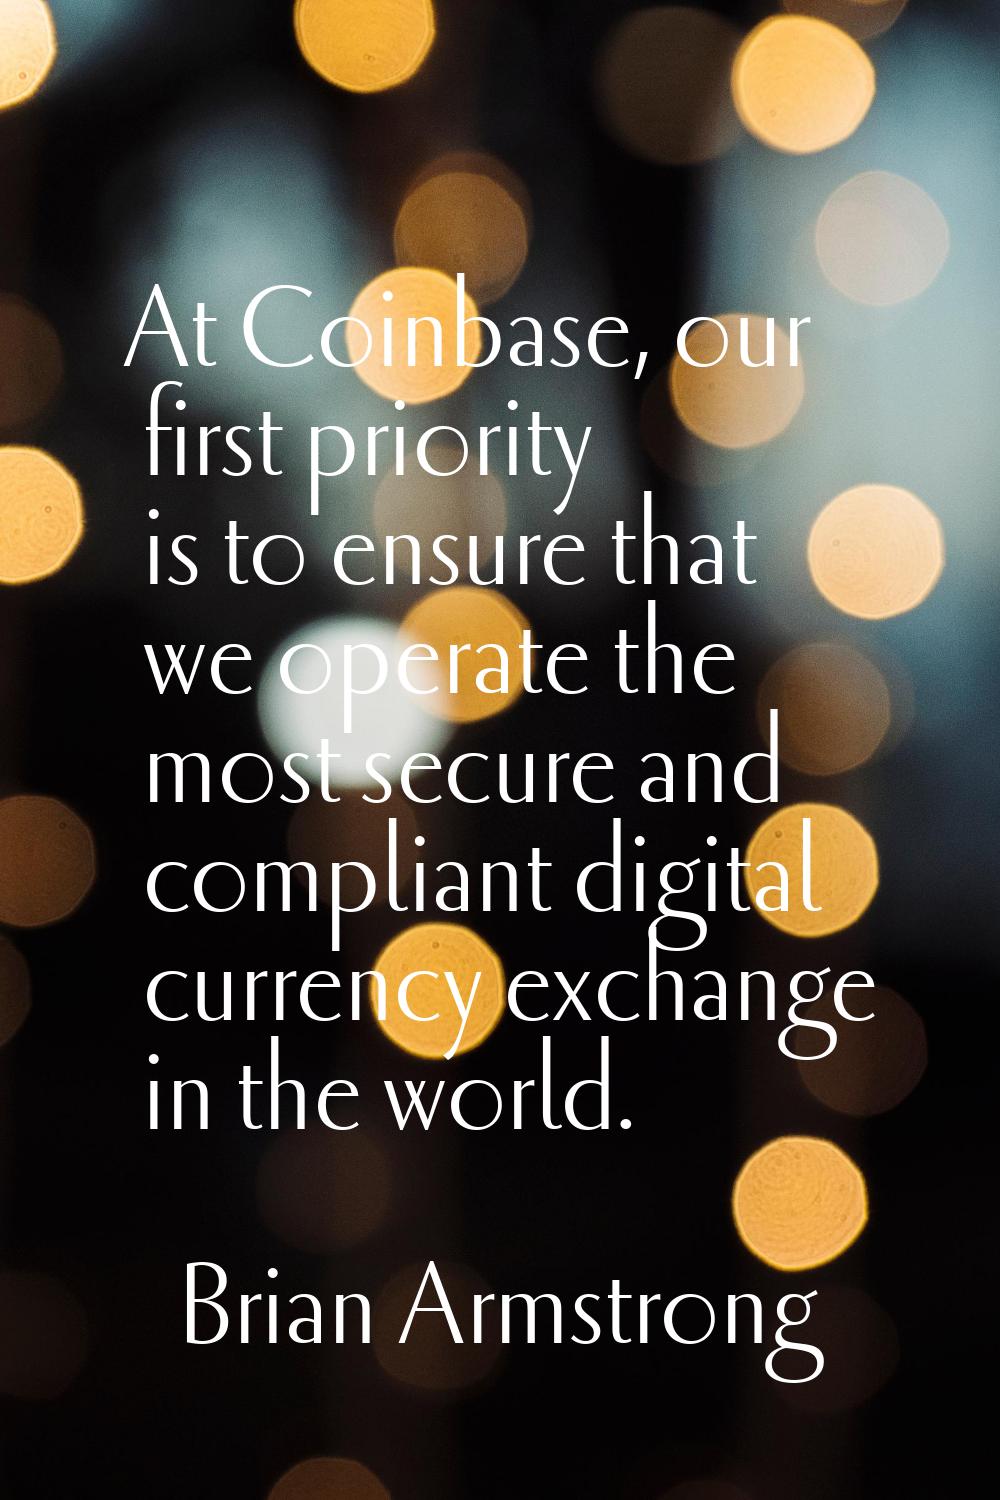 At Coinbase, our first priority is to ensure that we operate the most secure and compliant digital 